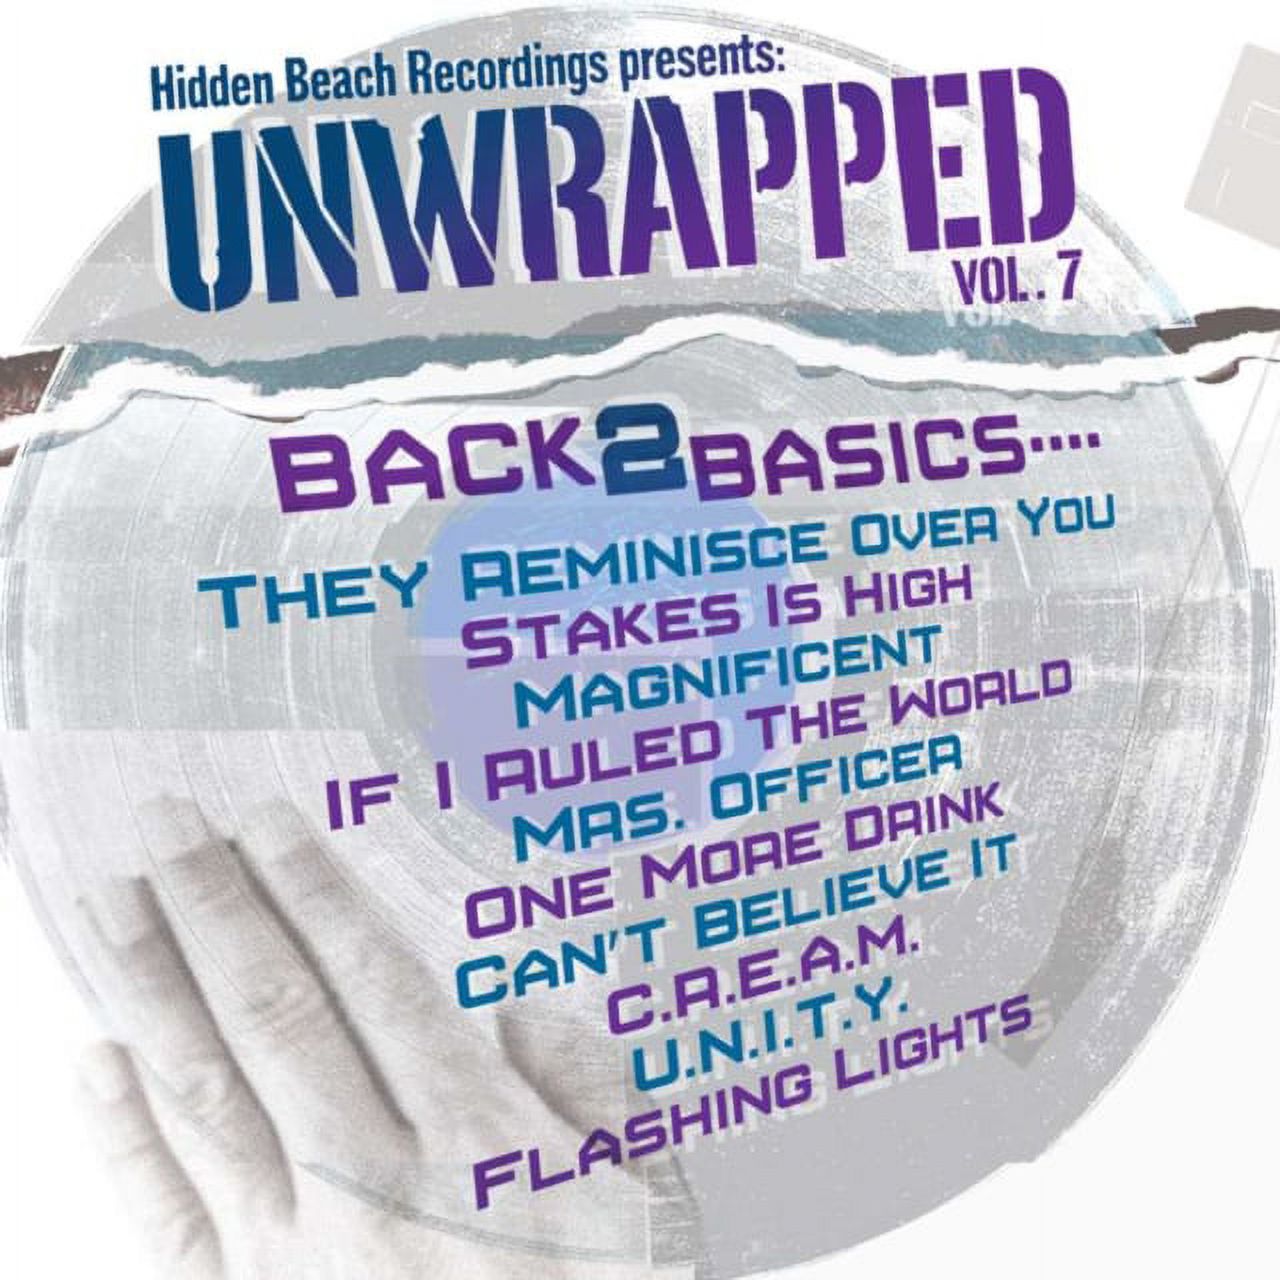 Hidden Beach Recordings Presents: Unwrapped, Vol. 7 (CD) - image 1 of 1